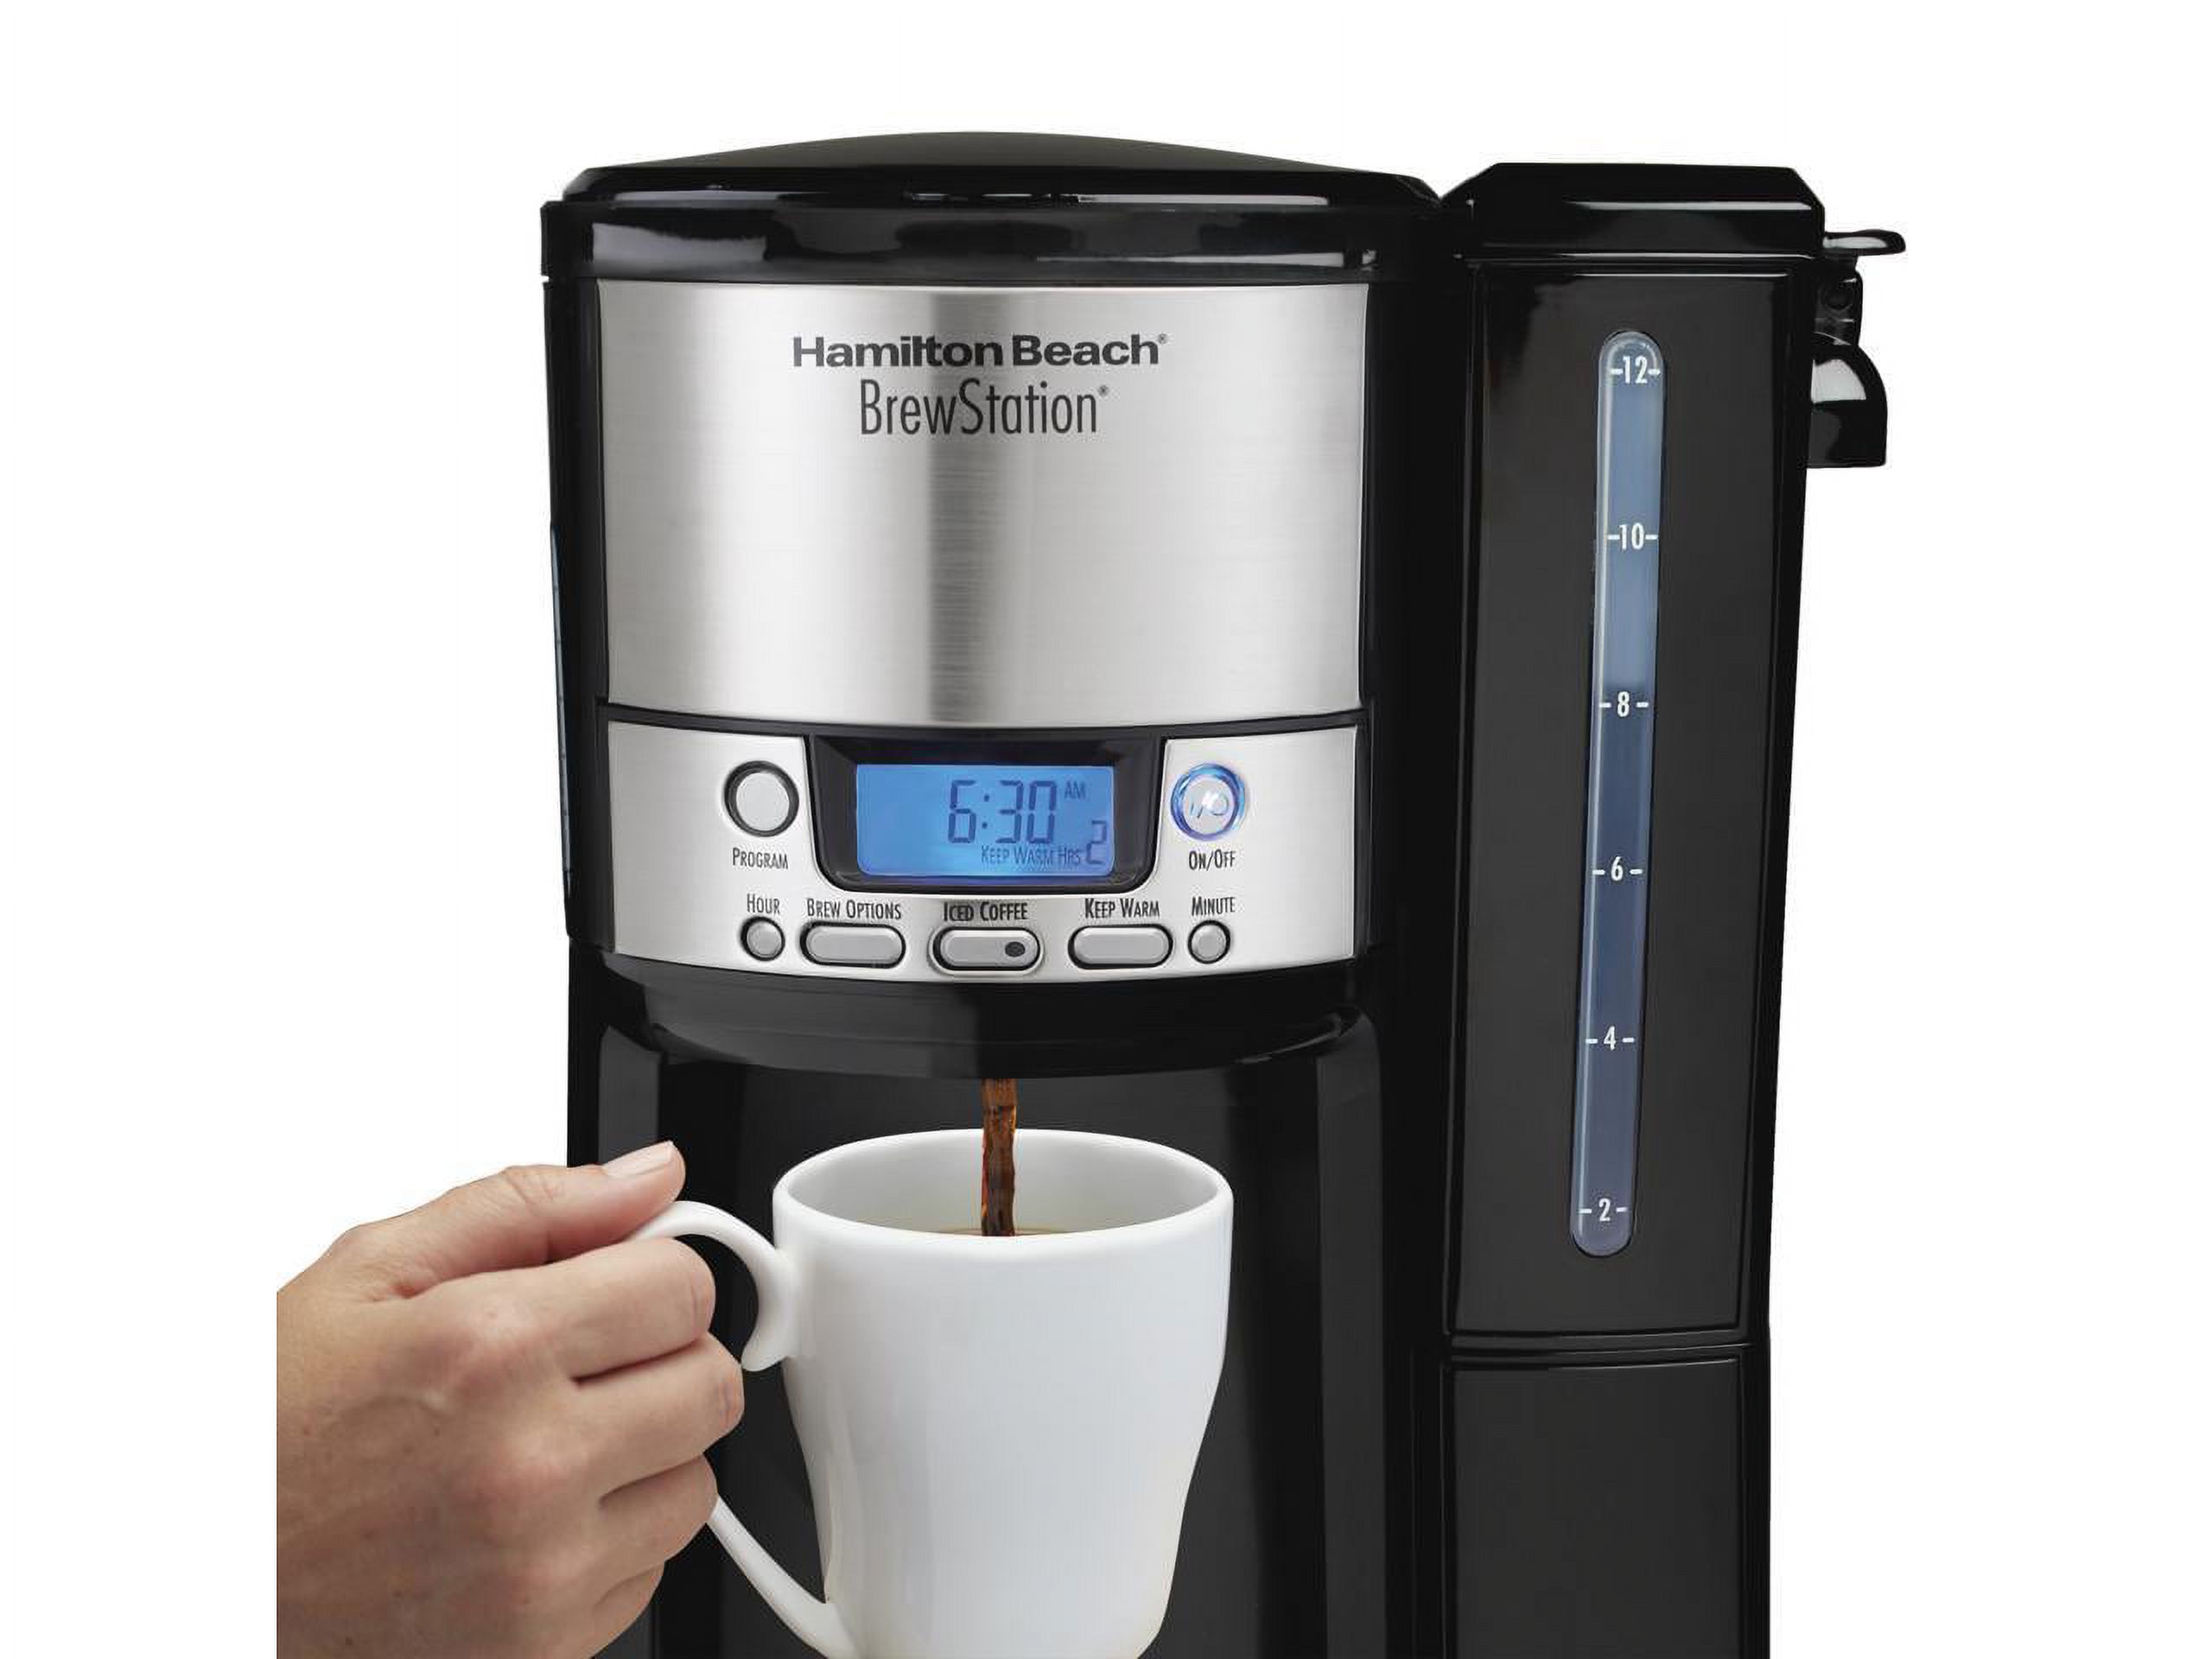 Hamilton Beach BrewStation 12 Cup Coffee Maker with Internal Heating, Black - image 2 of 6